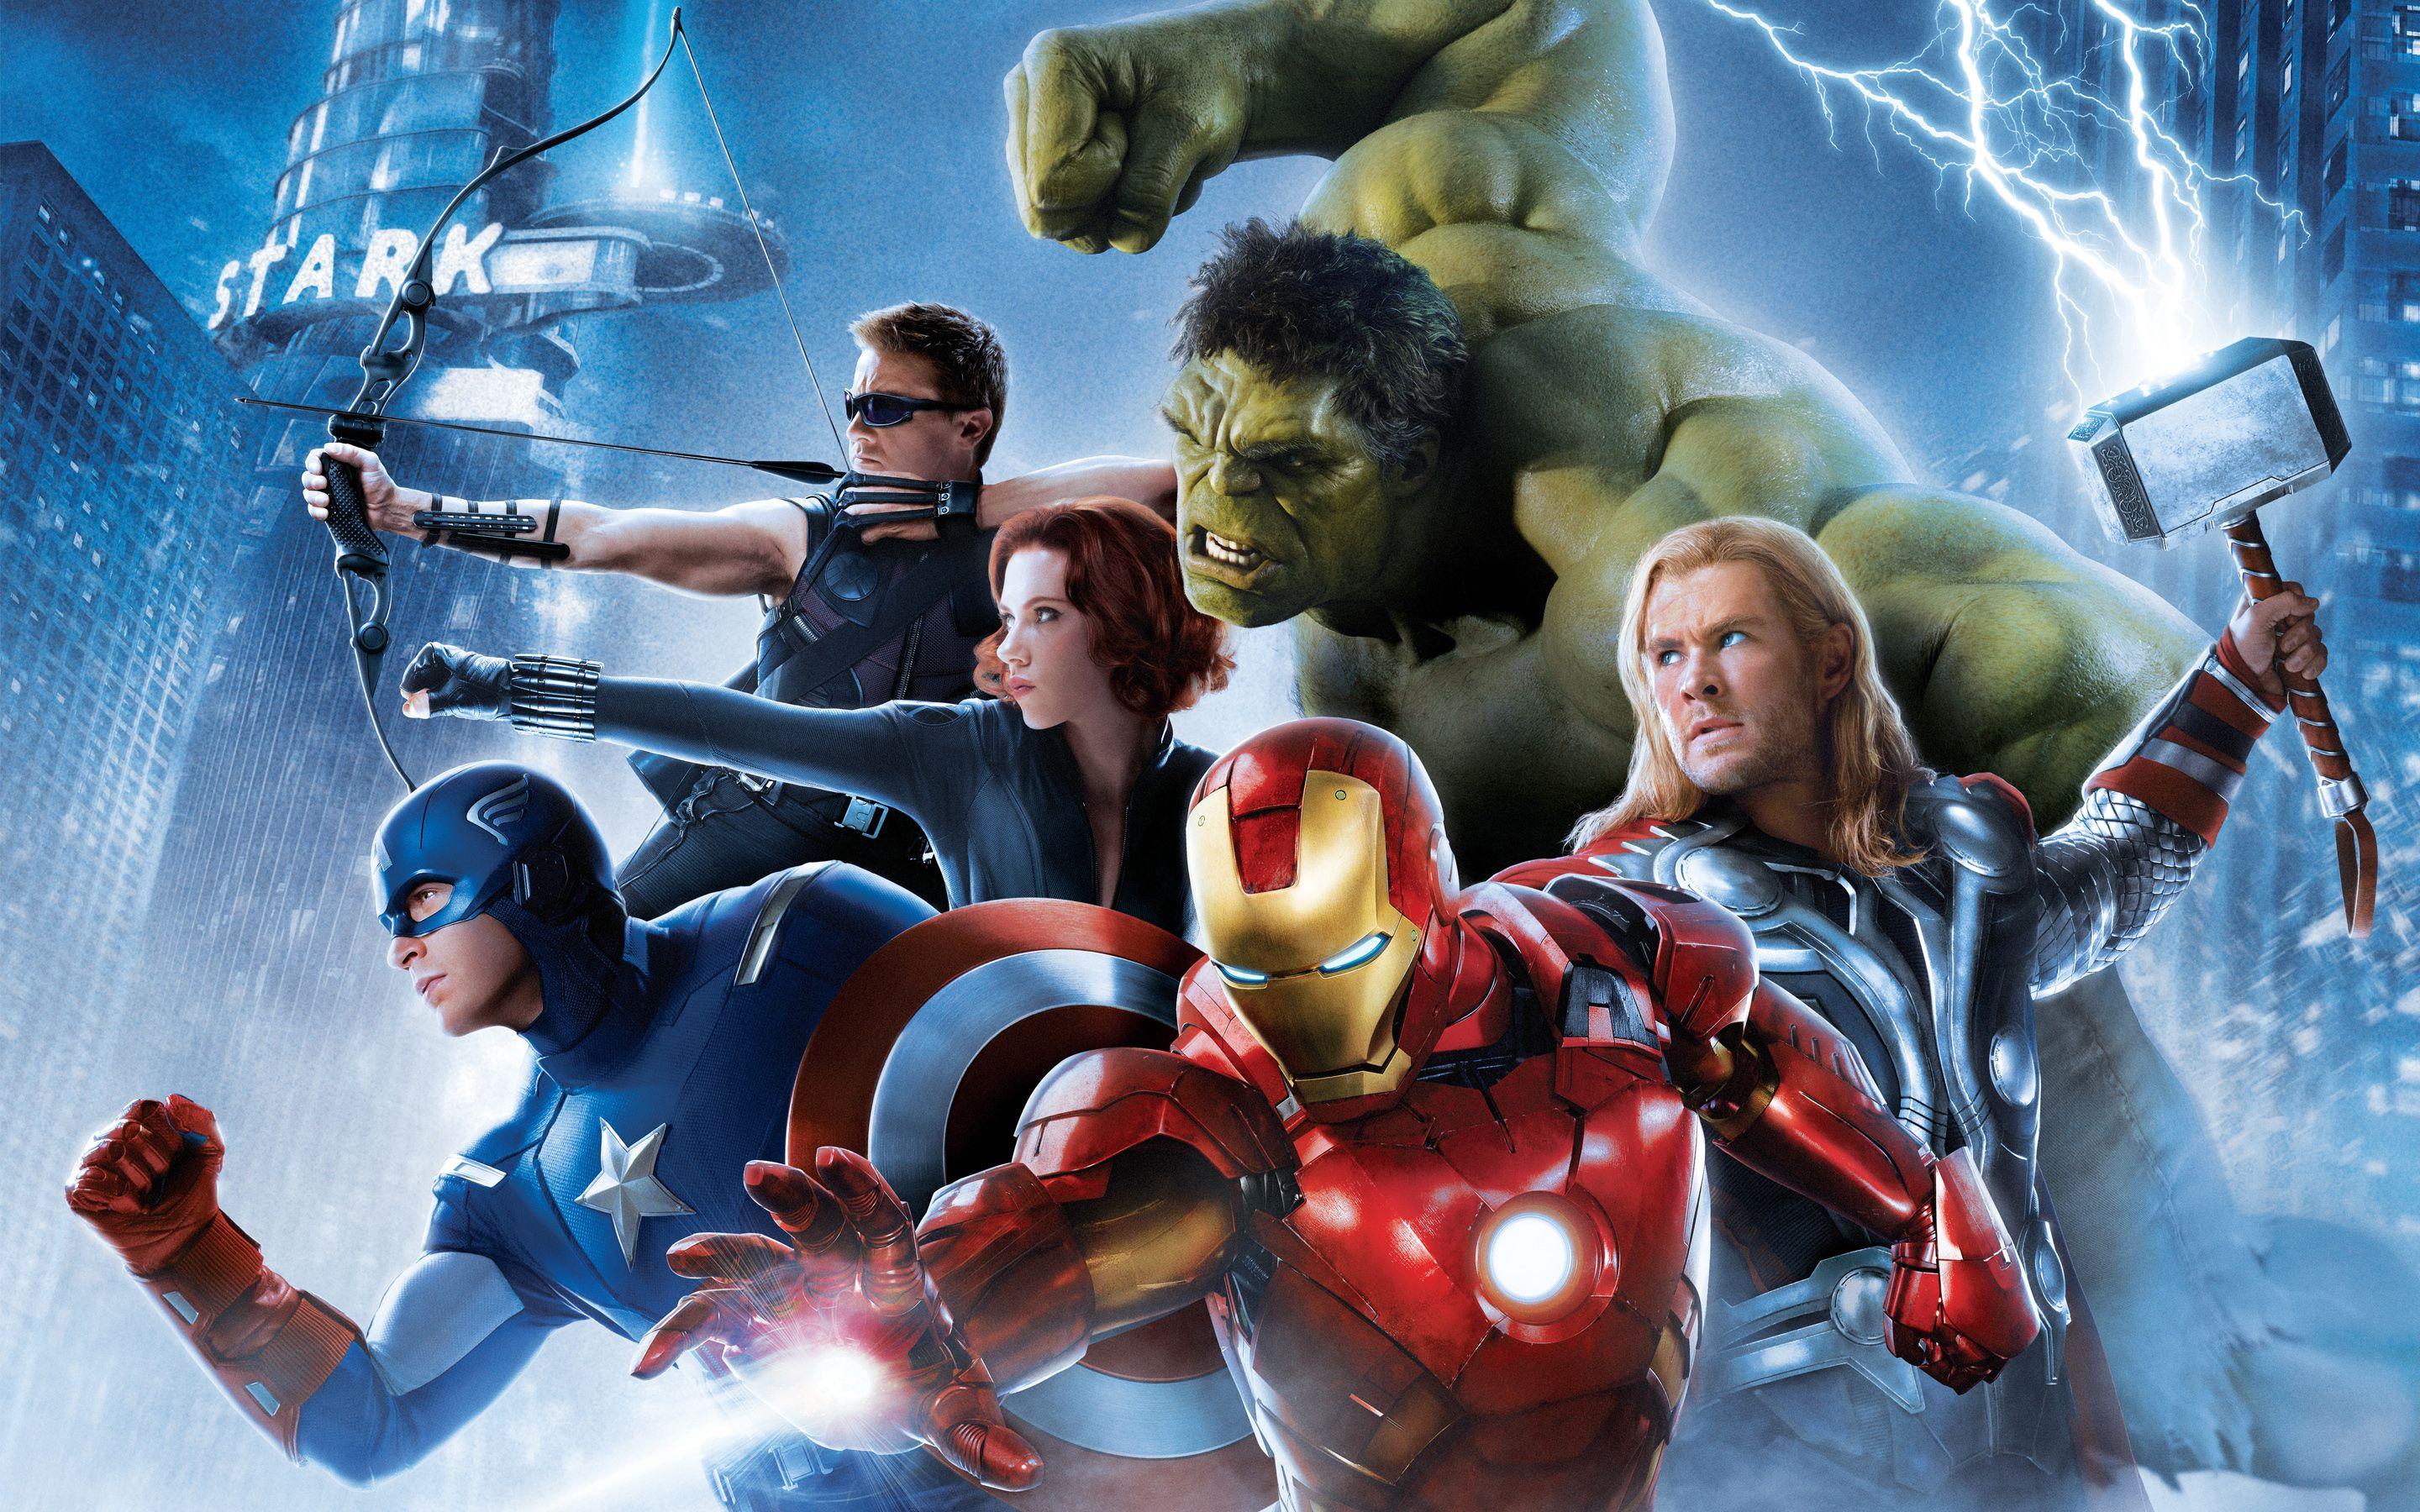 Avengers 2 Wallpapers Top Free Avengers 2 Backgrounds Images, Photos, Reviews